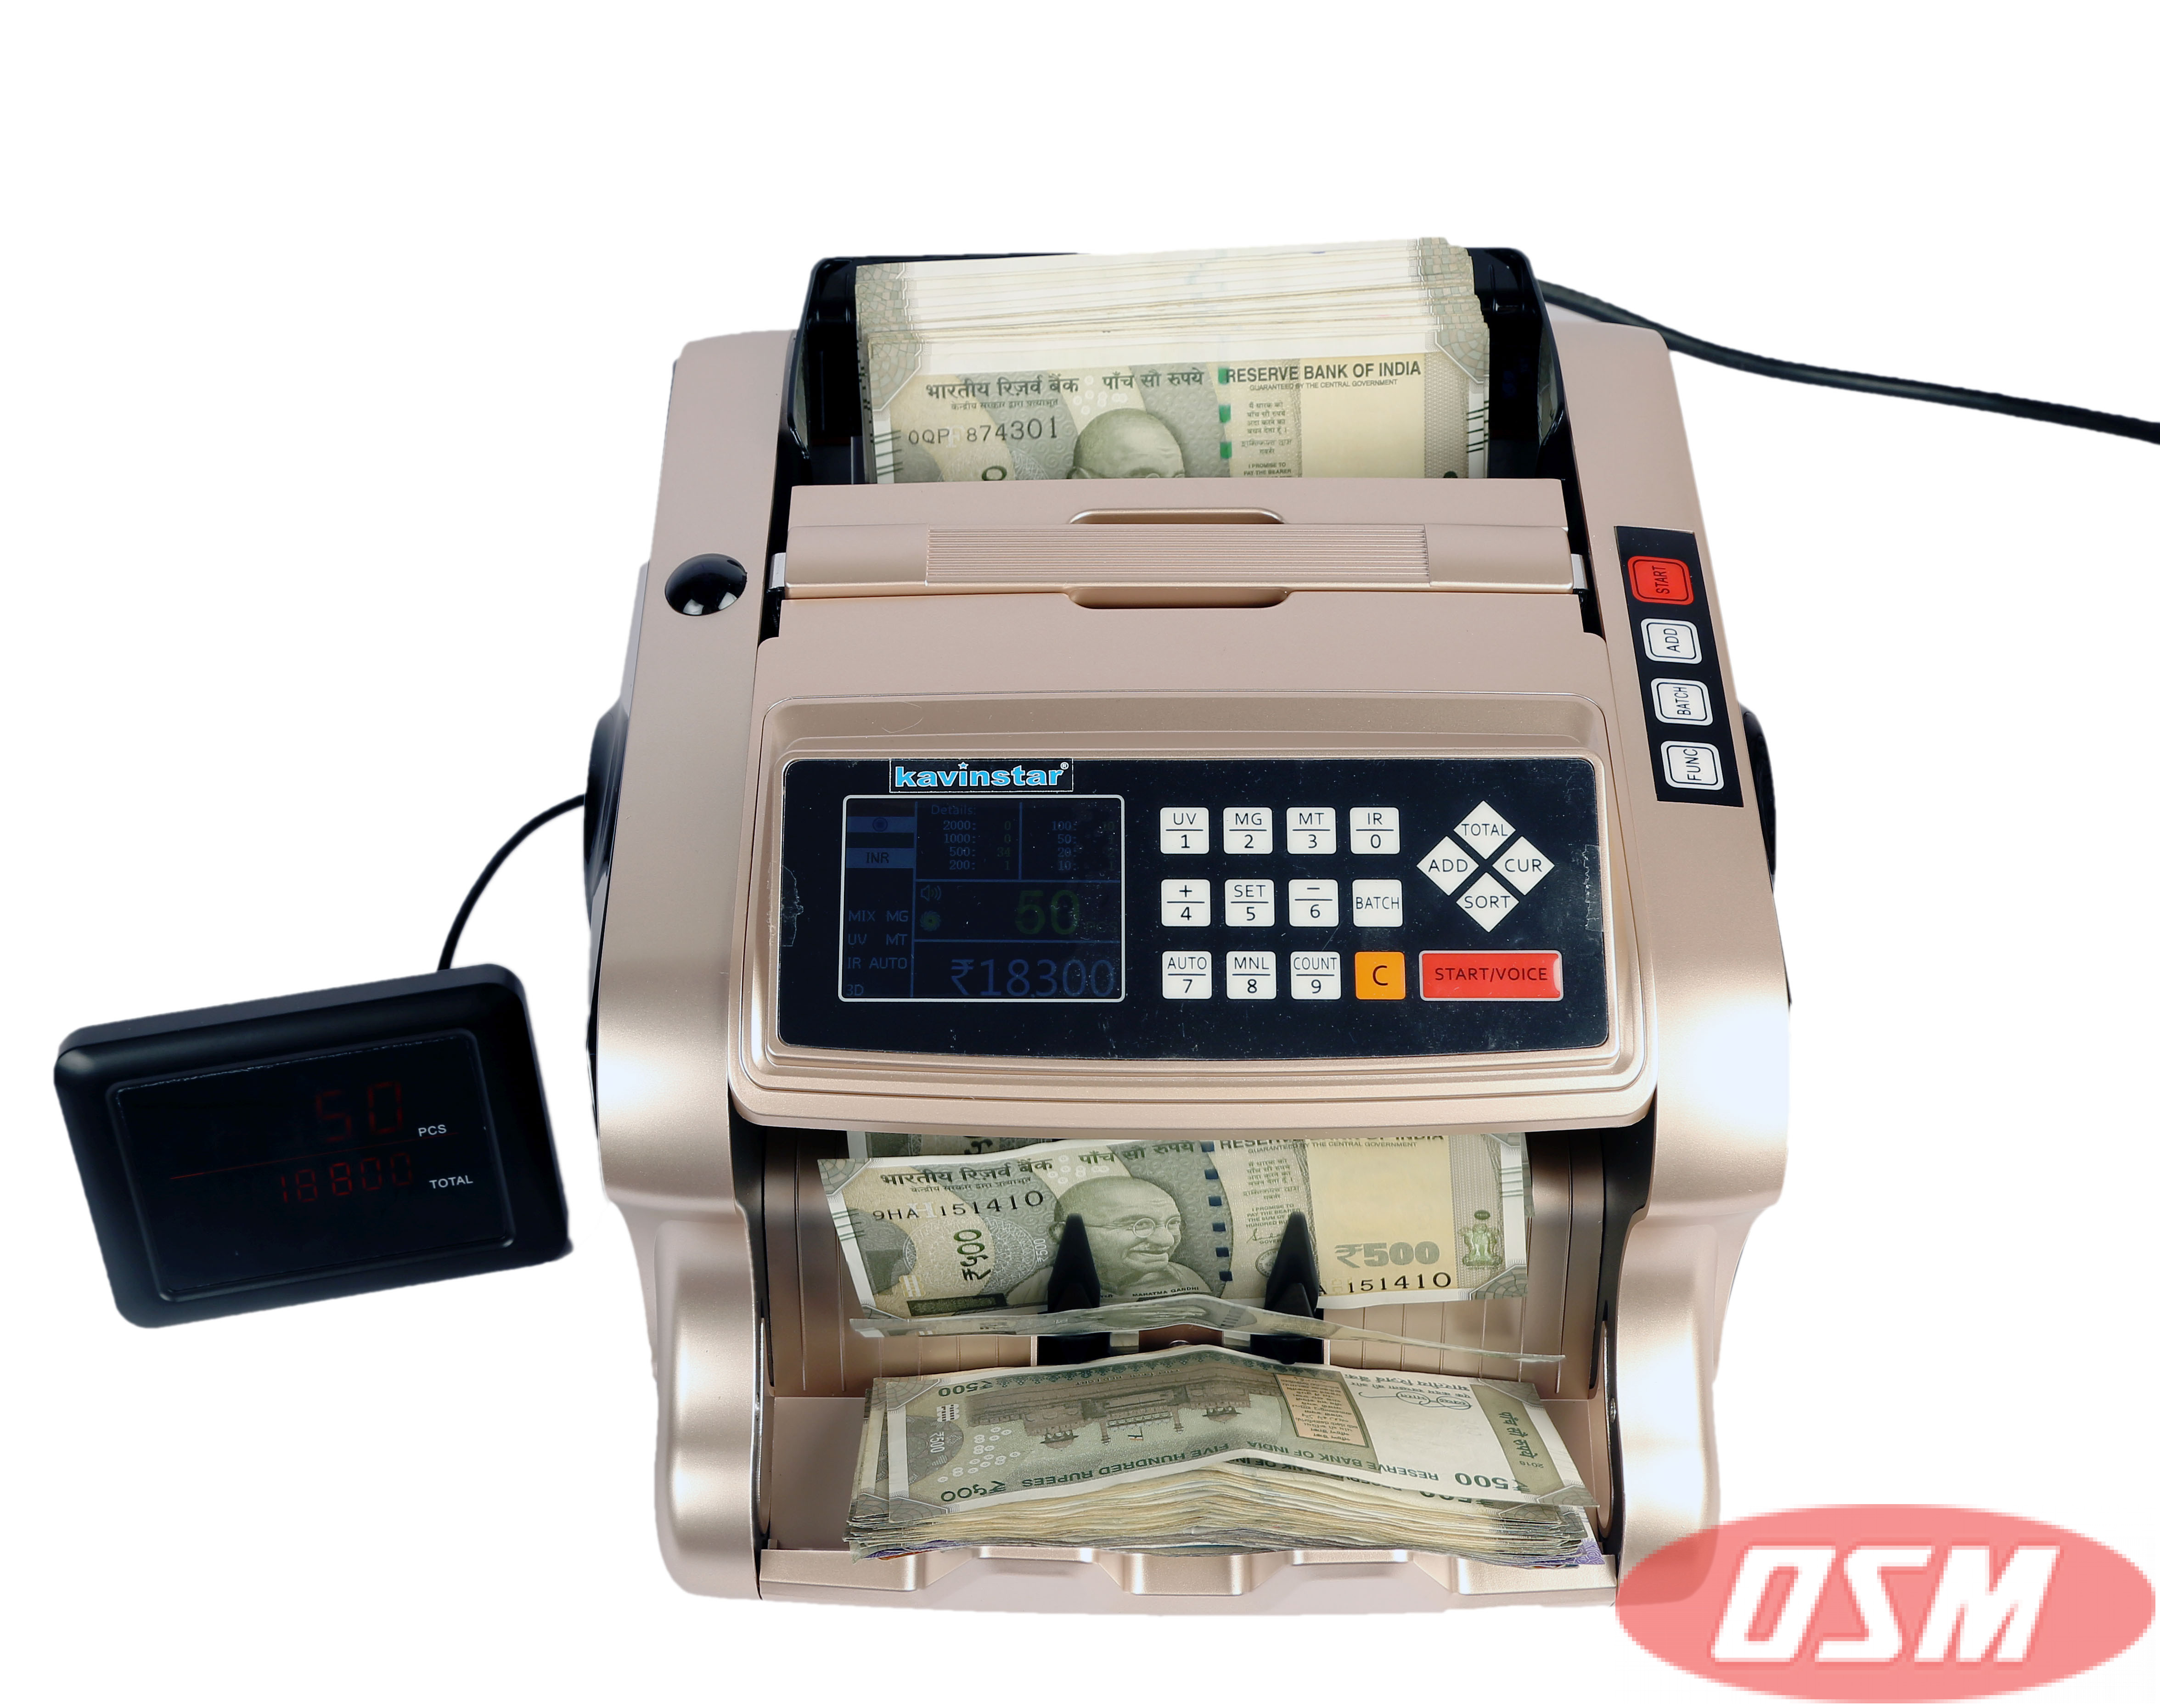 Kavinstar Mix Currency Counting Machine Dealers In Delhi